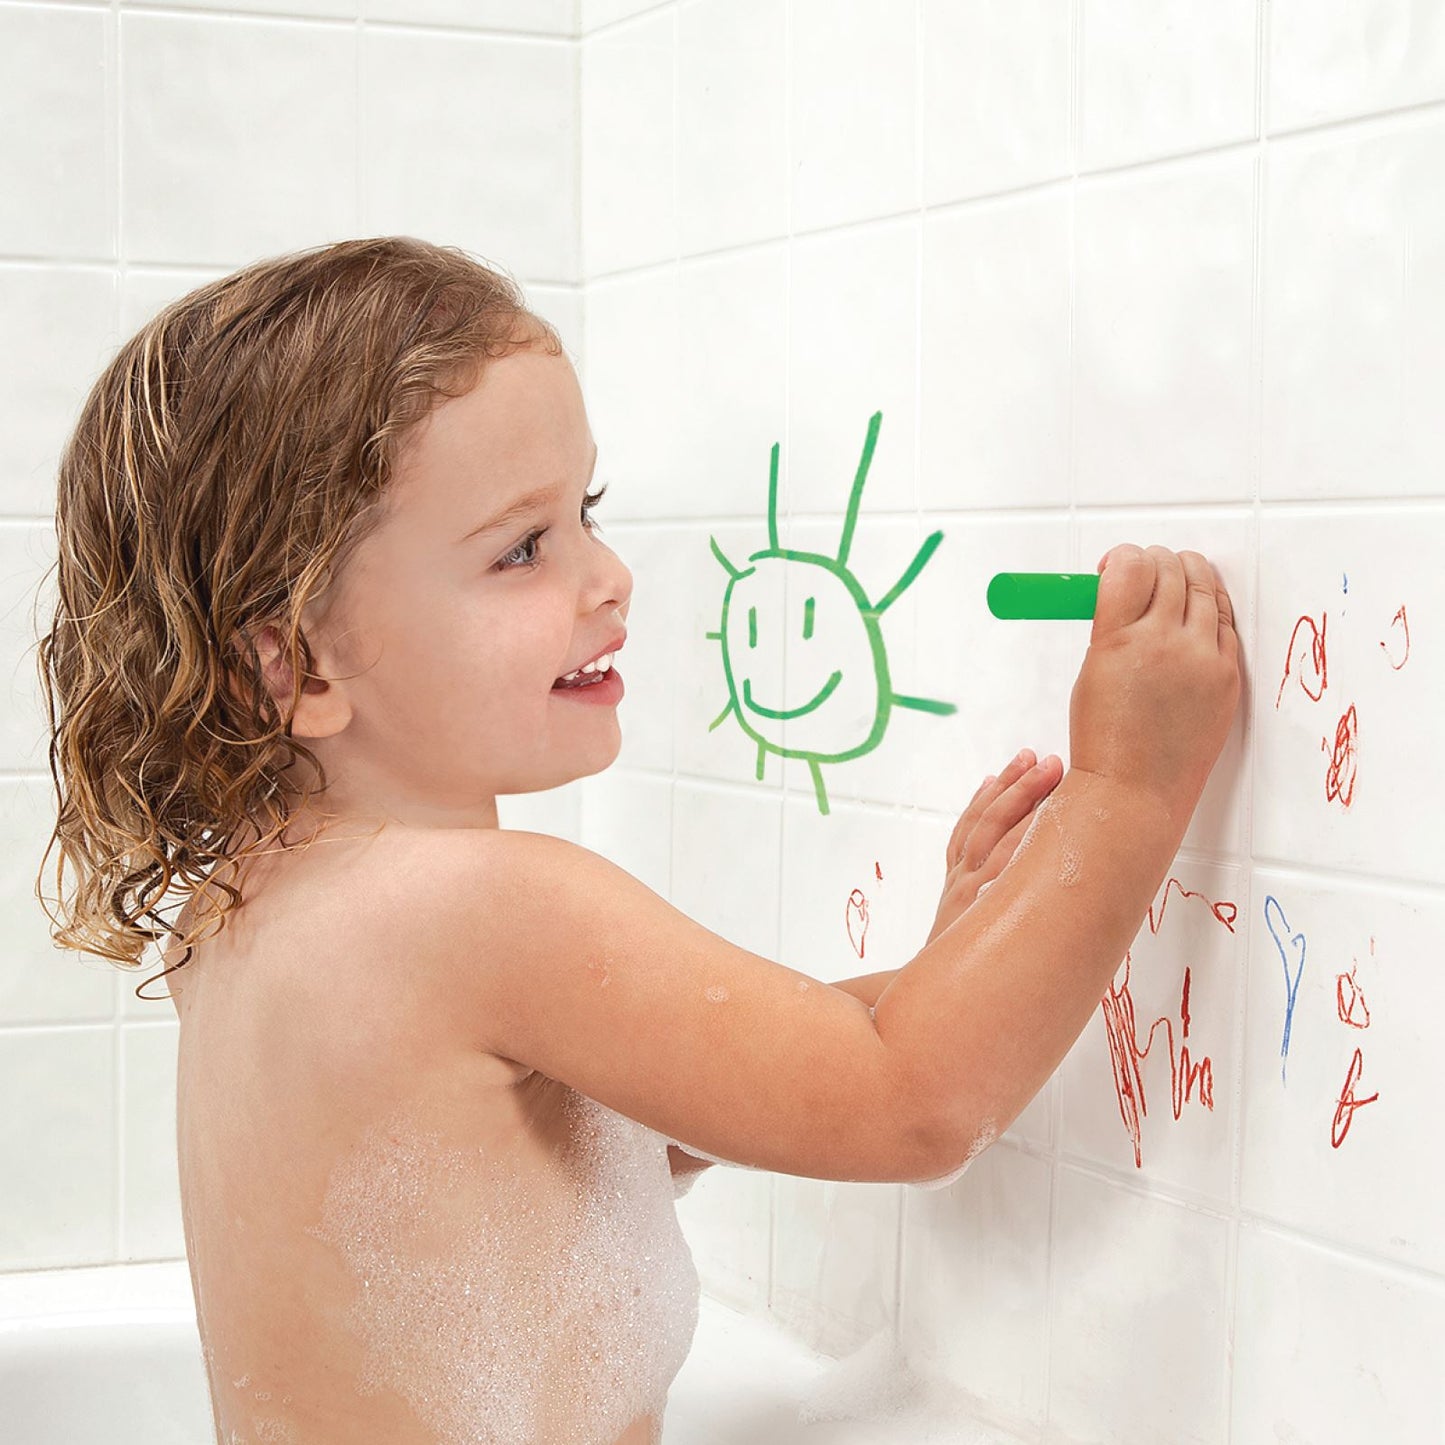 Pack Of 6 Non-Toxic Baby Bath Crayons For Fun And Educational Crayoning